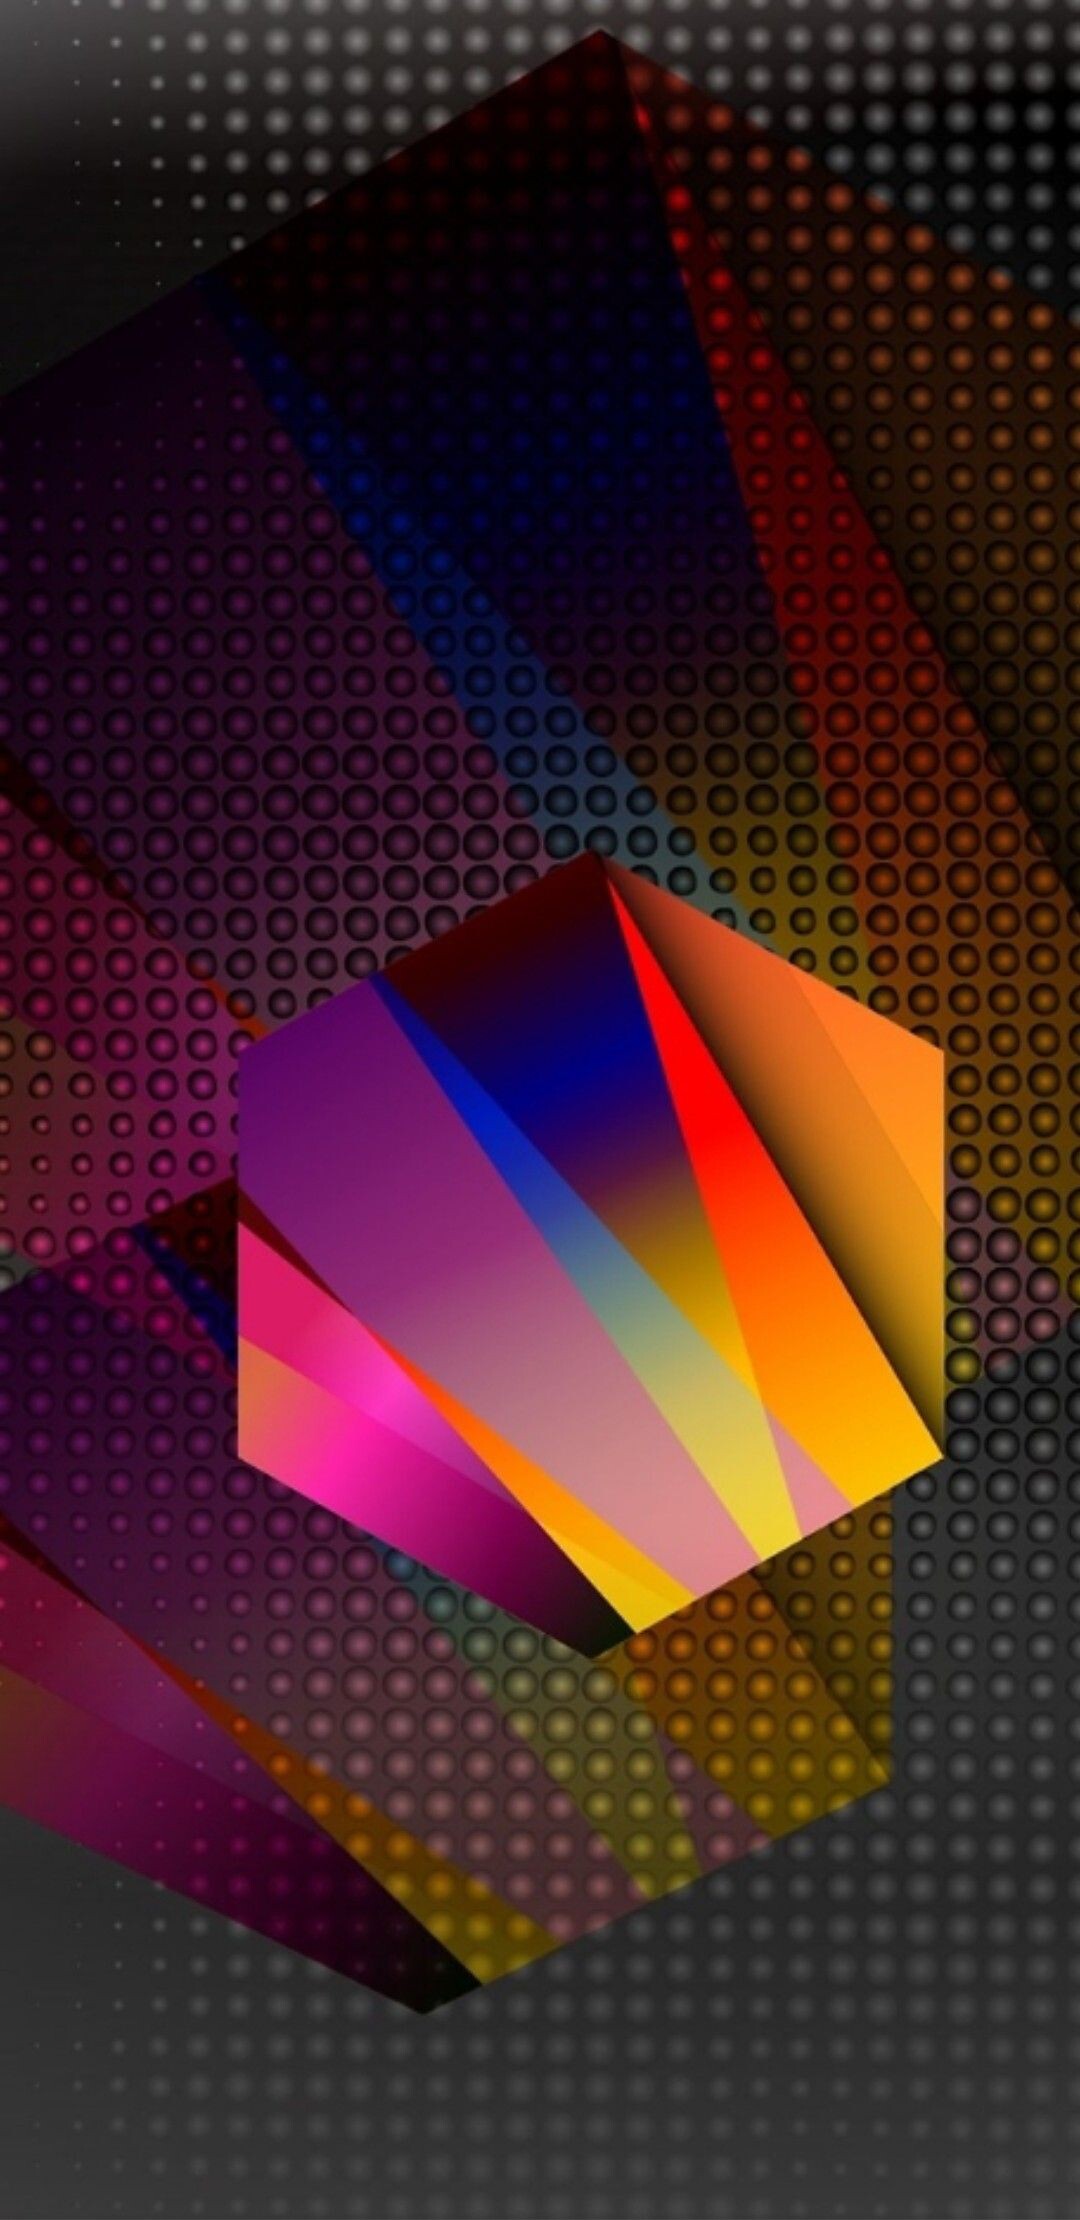 Geometric Abstract: Hexagons, Circles, Obtuse angles, Multicolored. 1080x2220 HD Wallpaper.